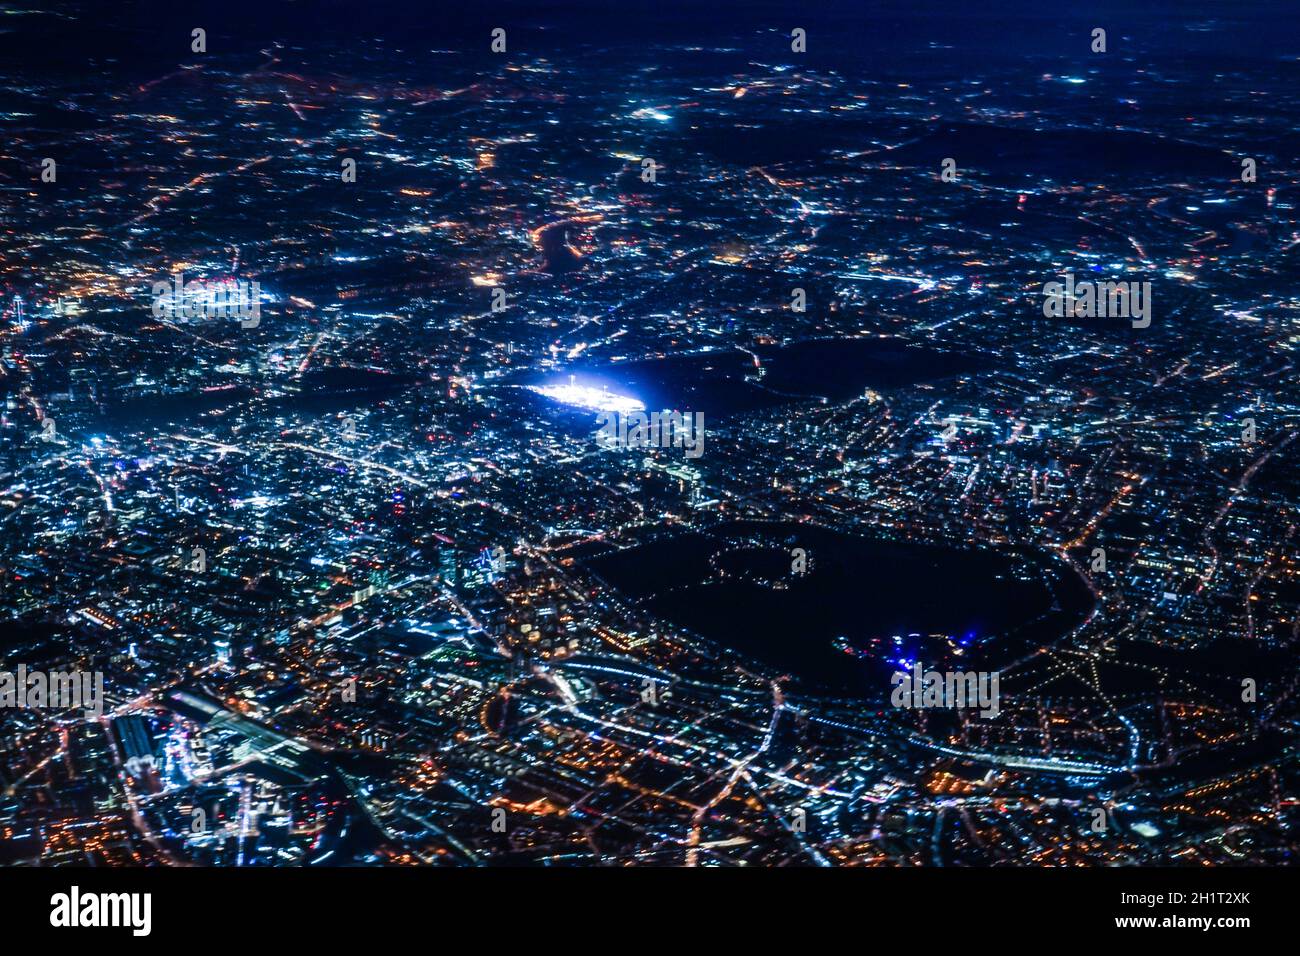 London night view as seen from an airplane. Shooting Location: United Kingdom, London Stock Photo